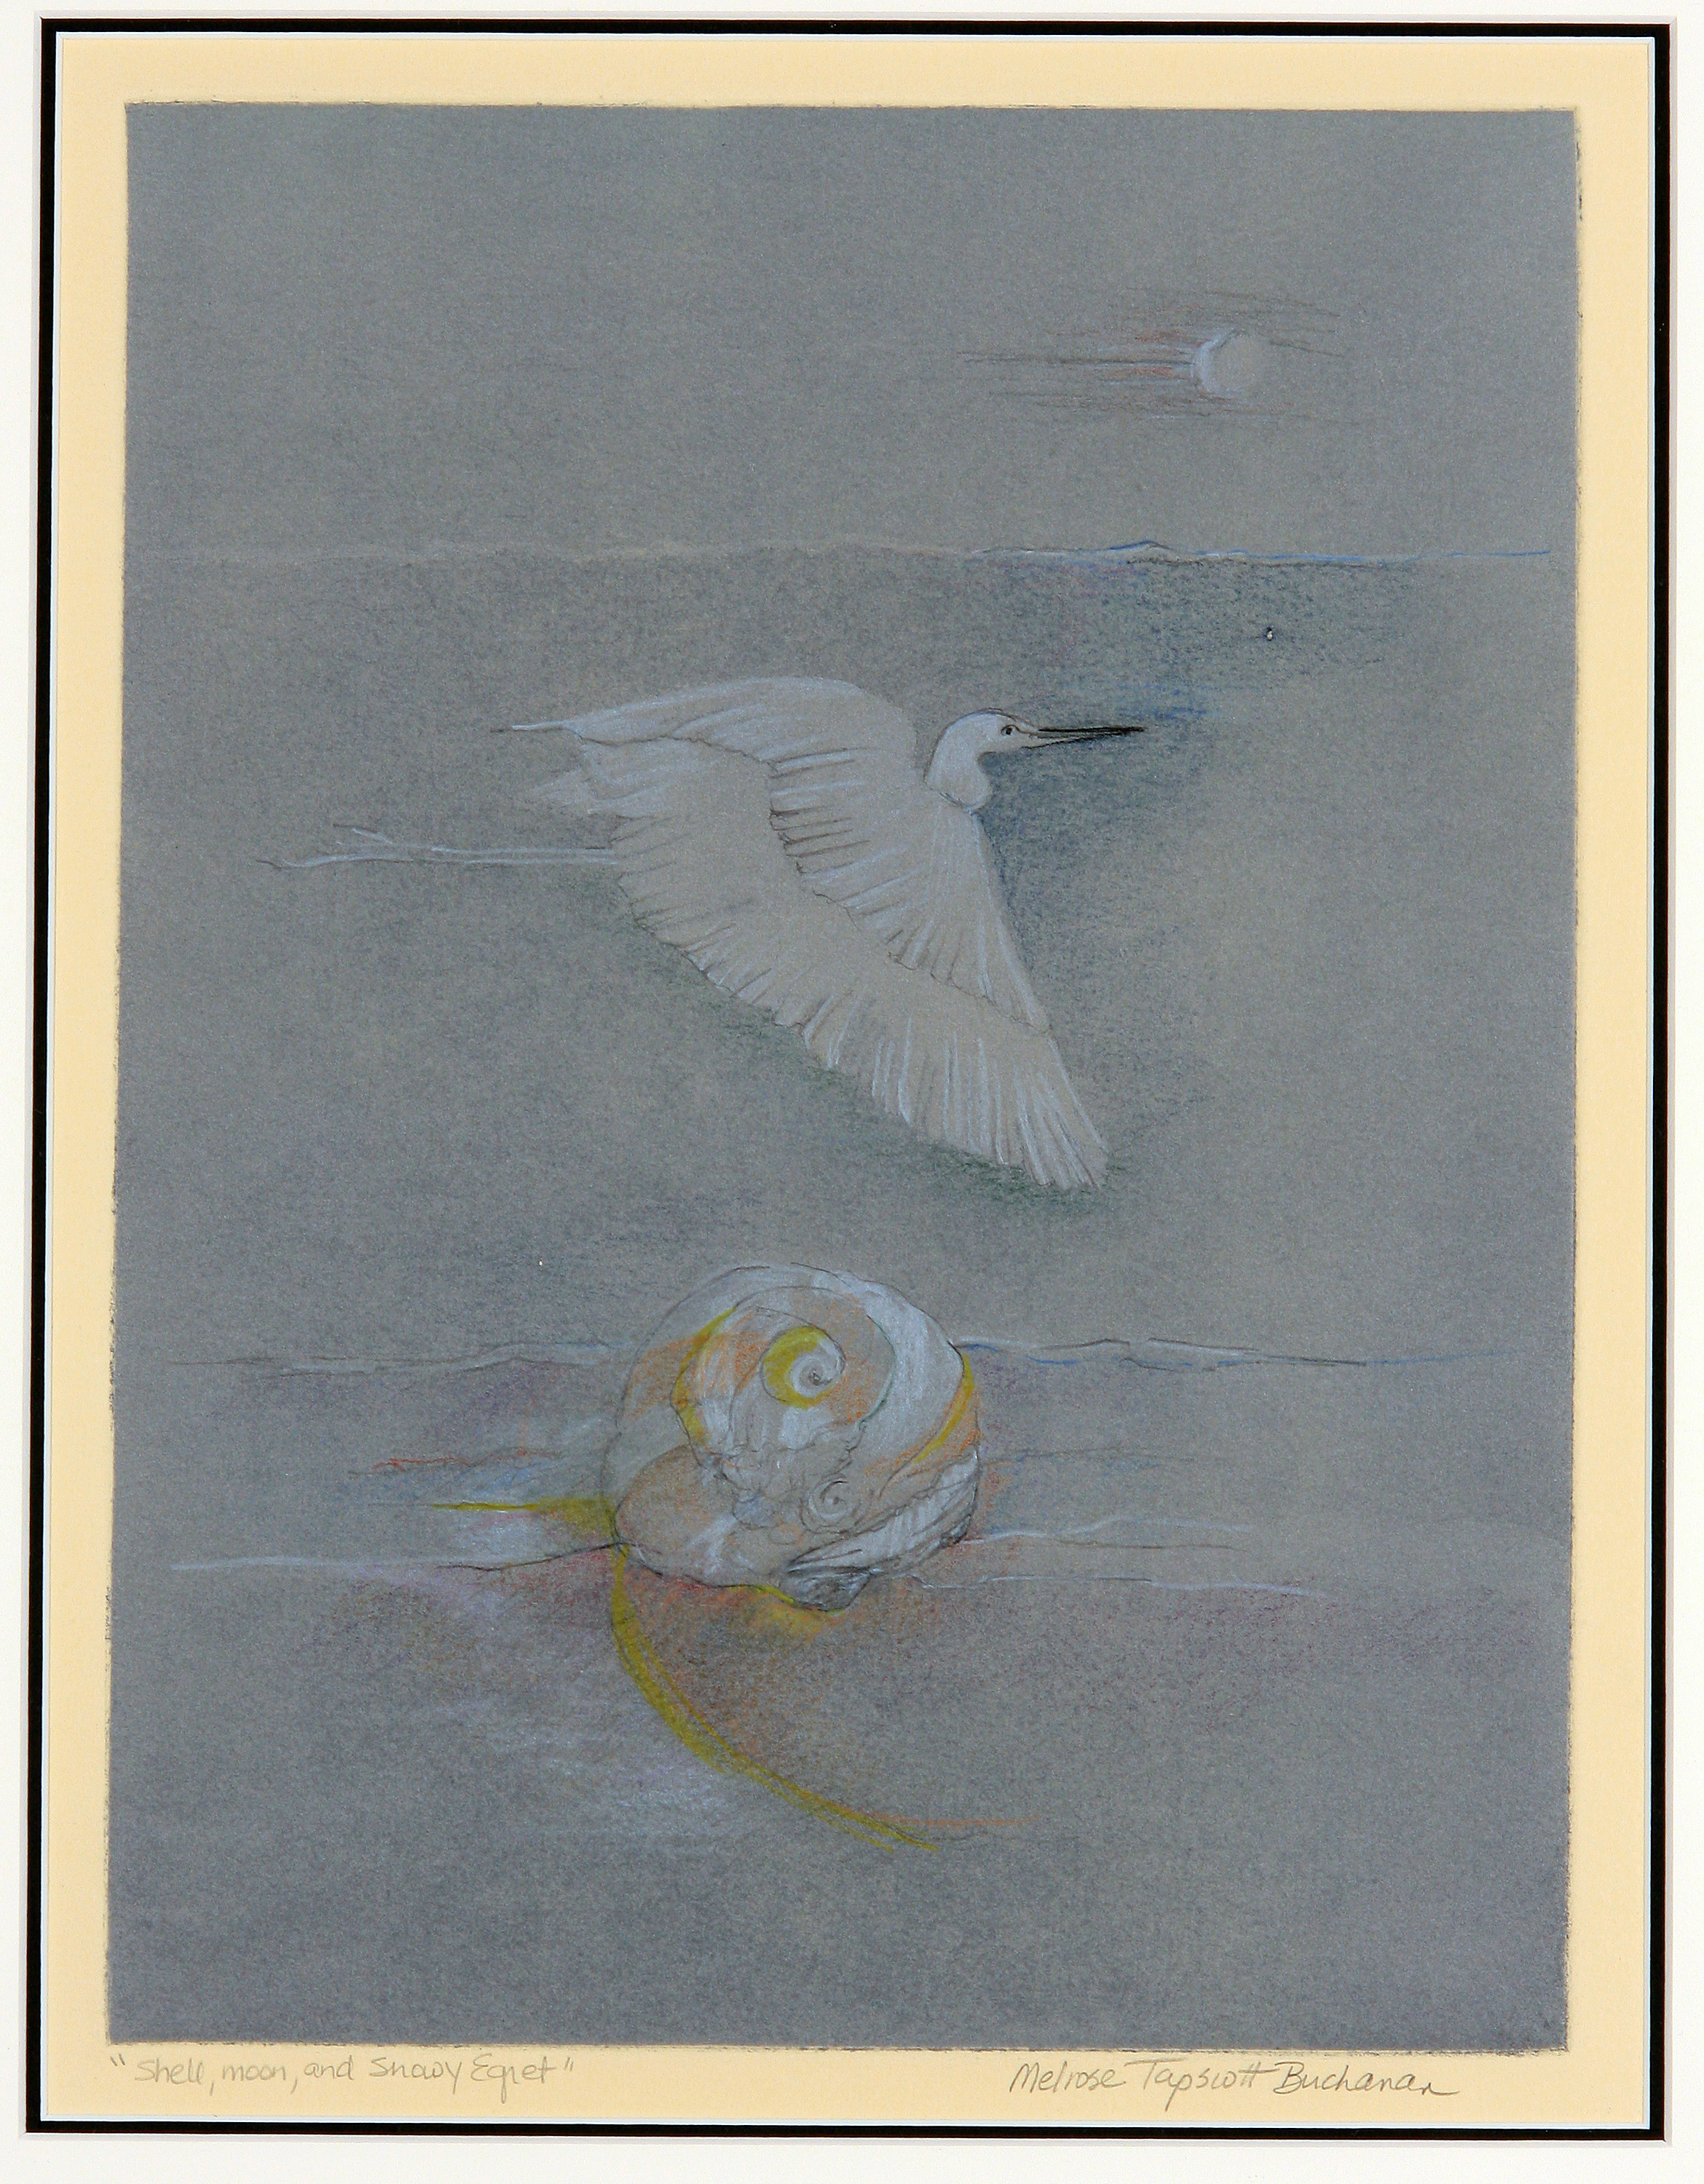 Shell, Moon, and Snowy Egret